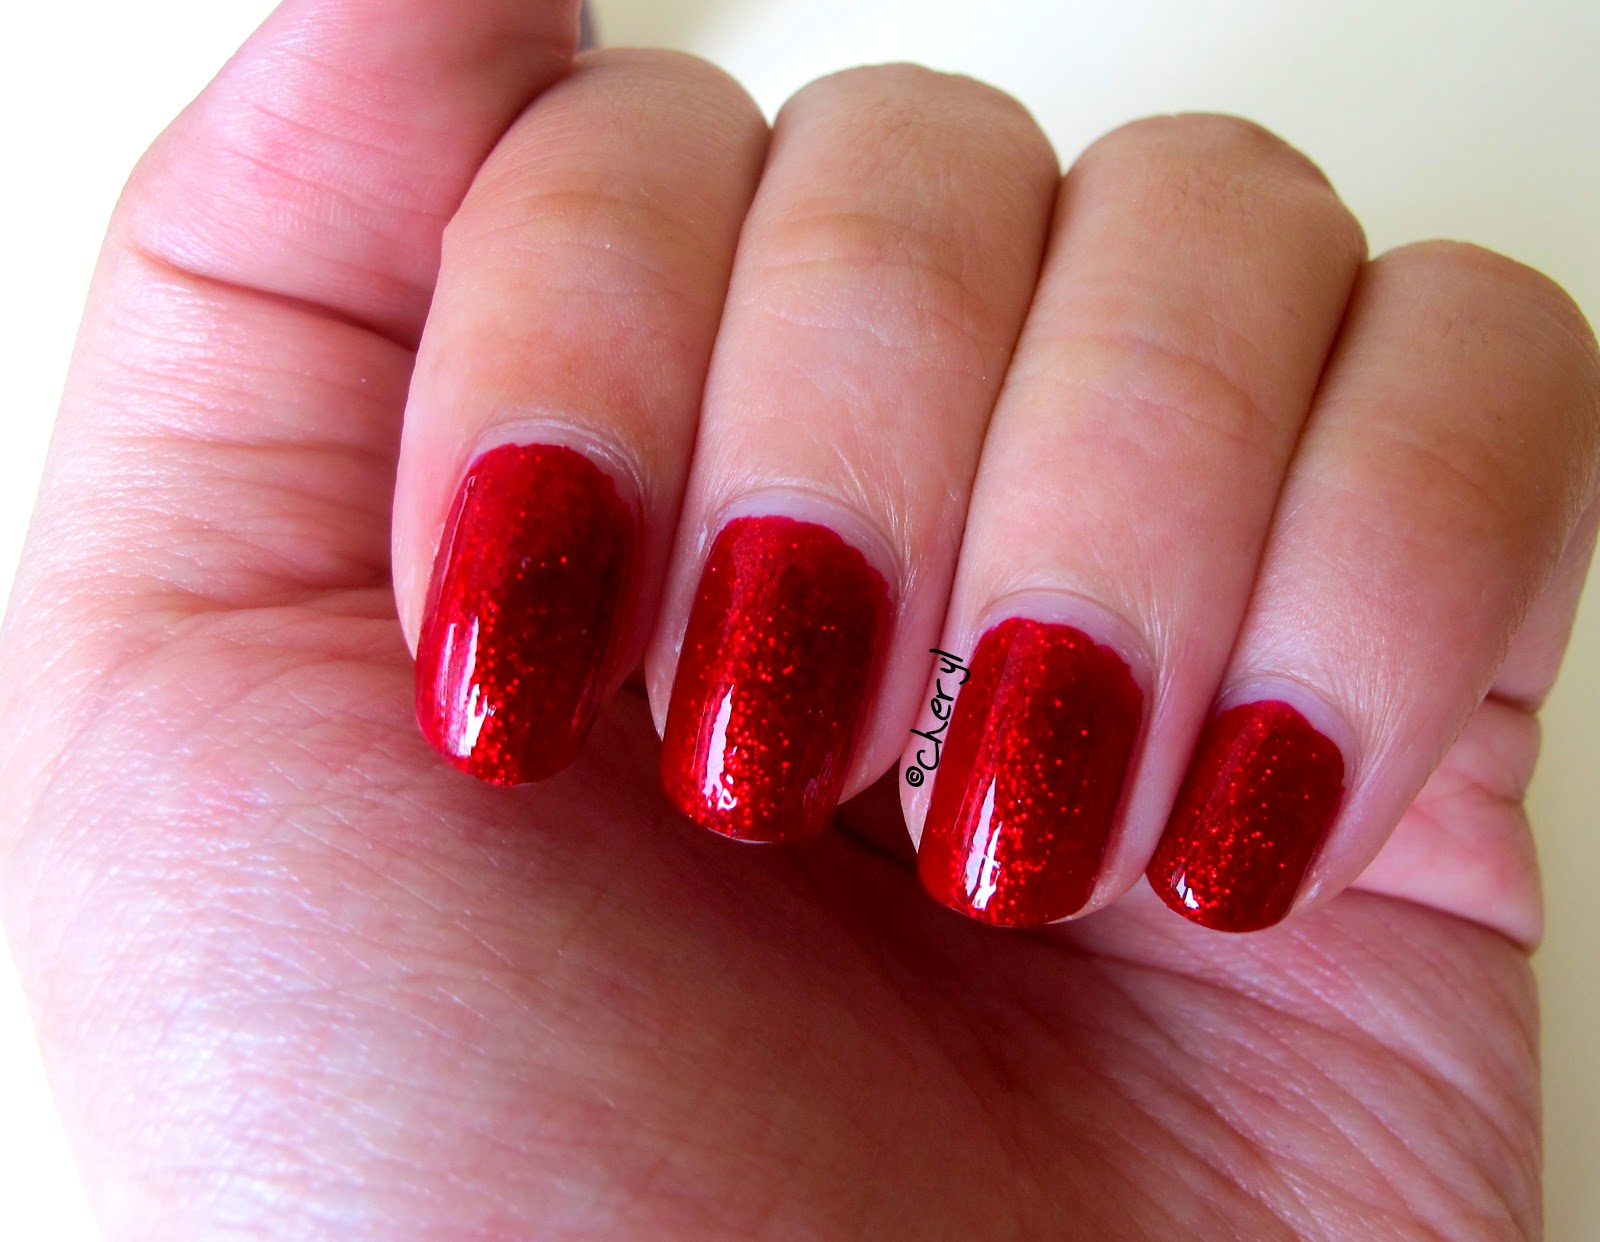 6. China Glaze Nail Lacquer in "Ruby Pumps" - wide 9